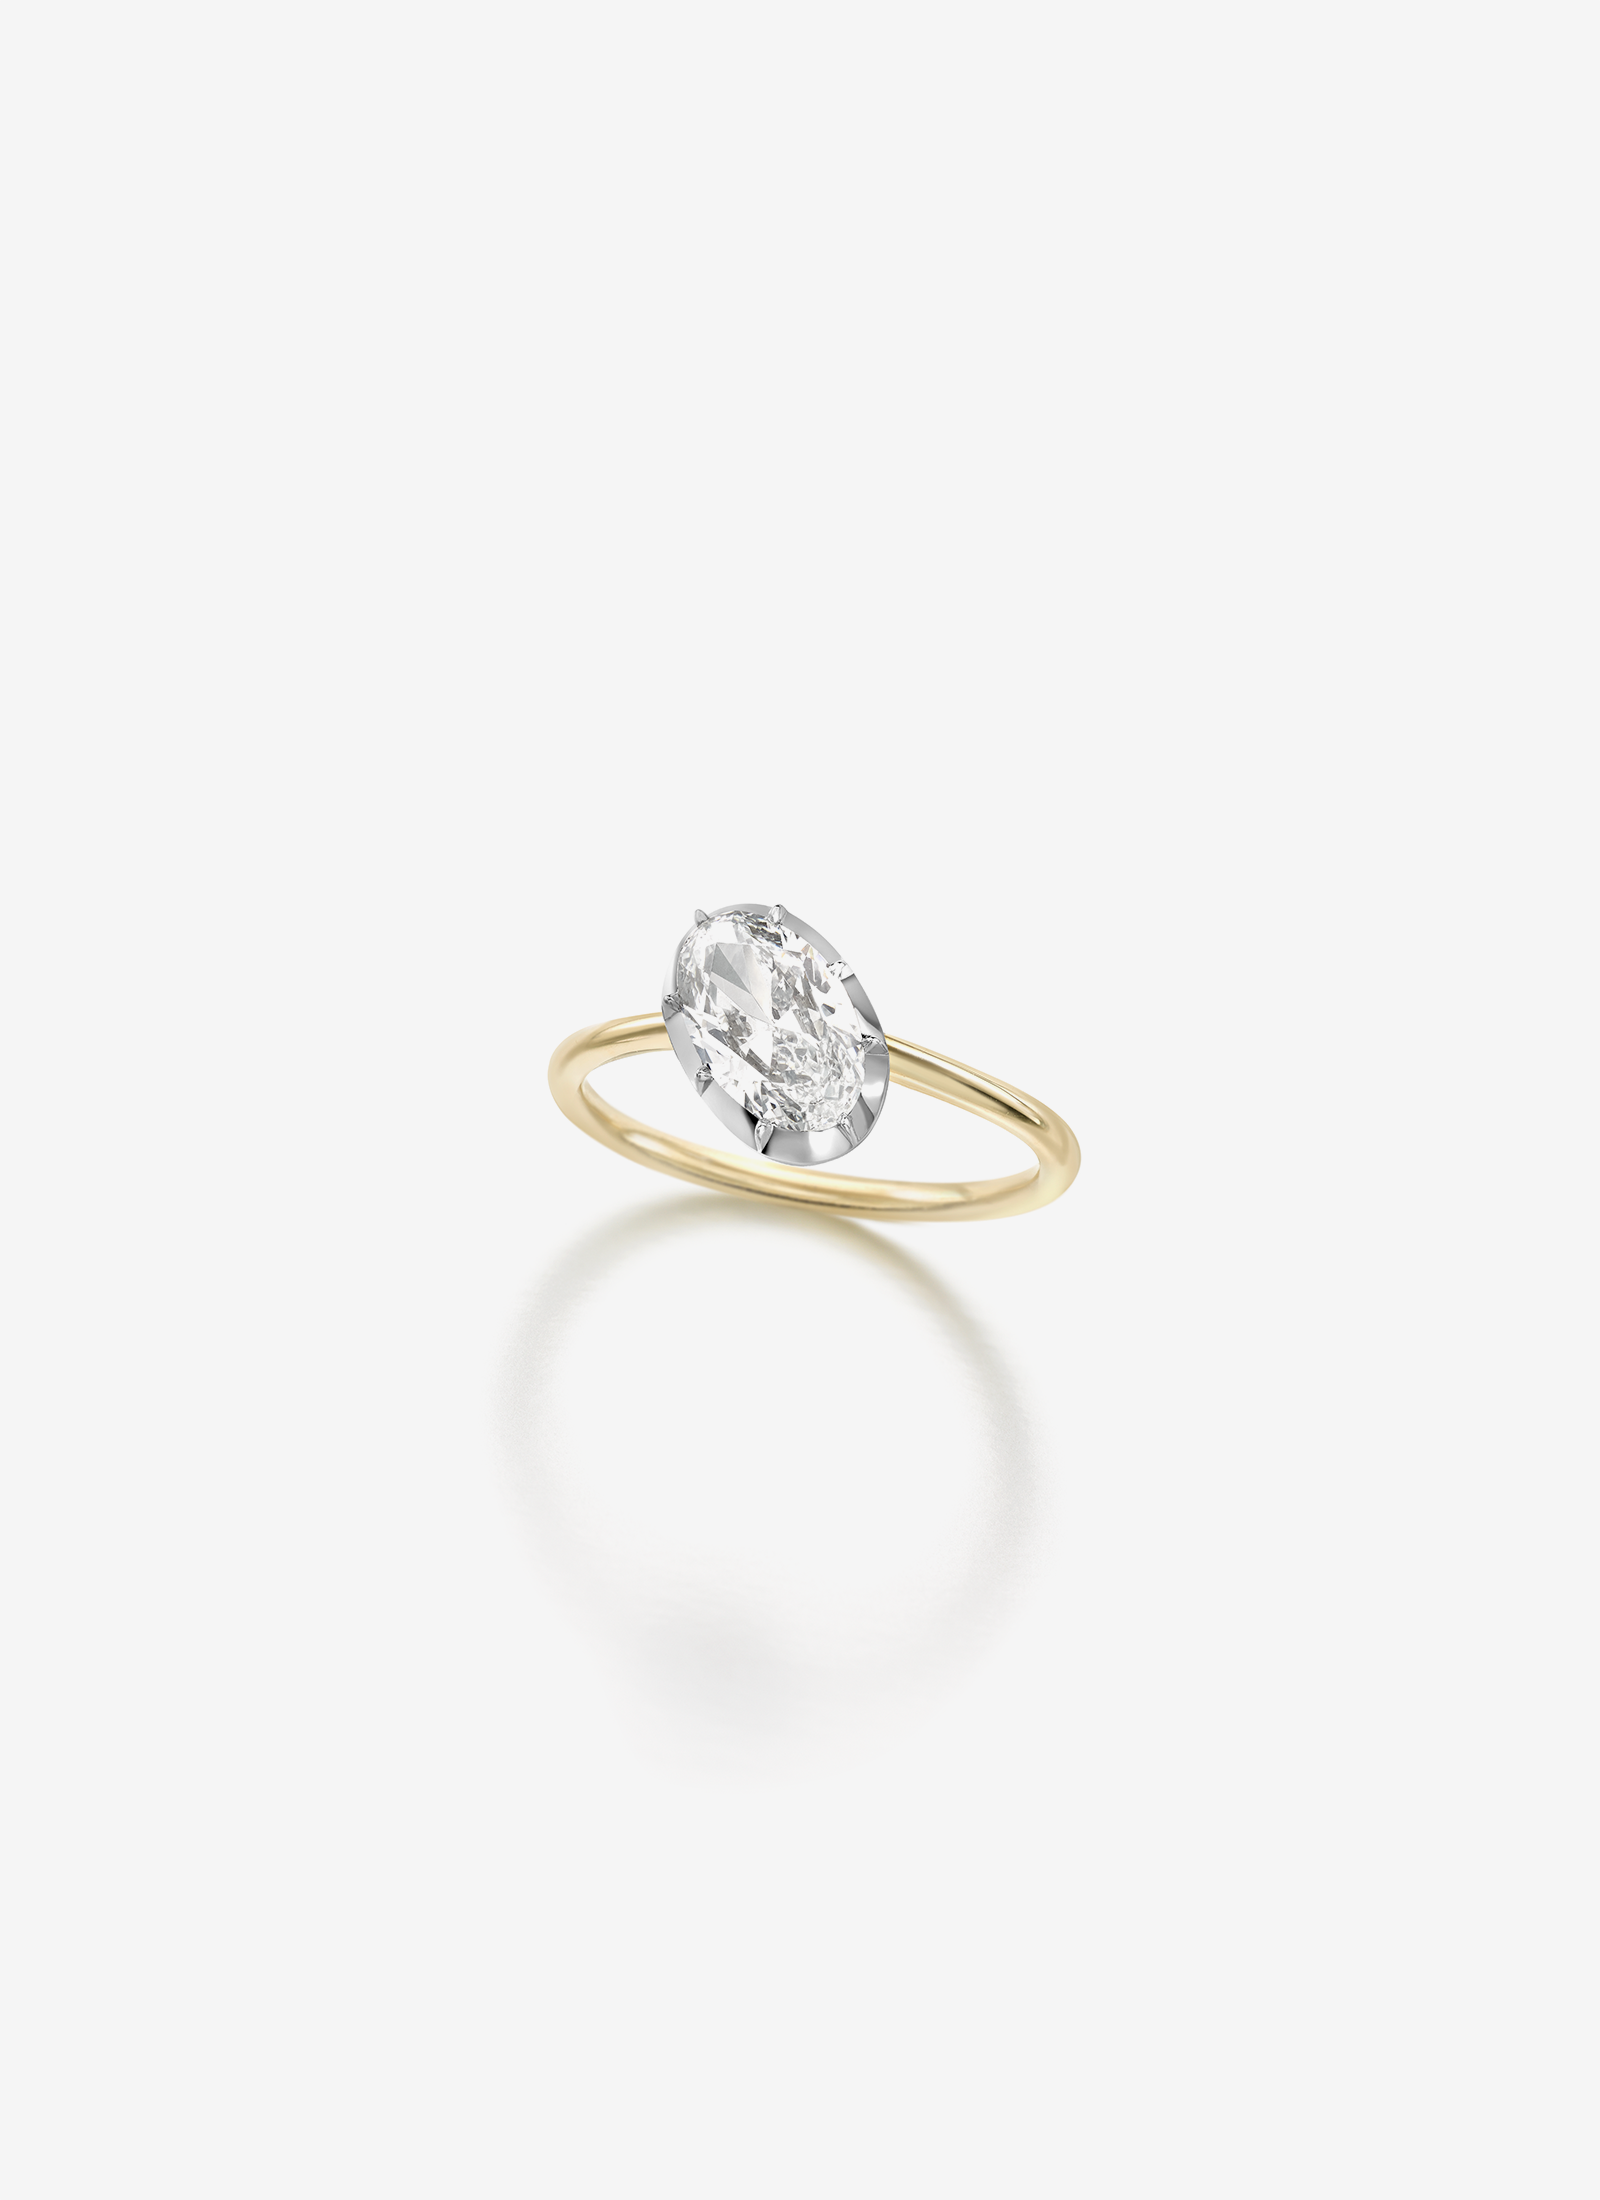 Button Back 1.20ct Oval Tilted Diamond Ring - WG